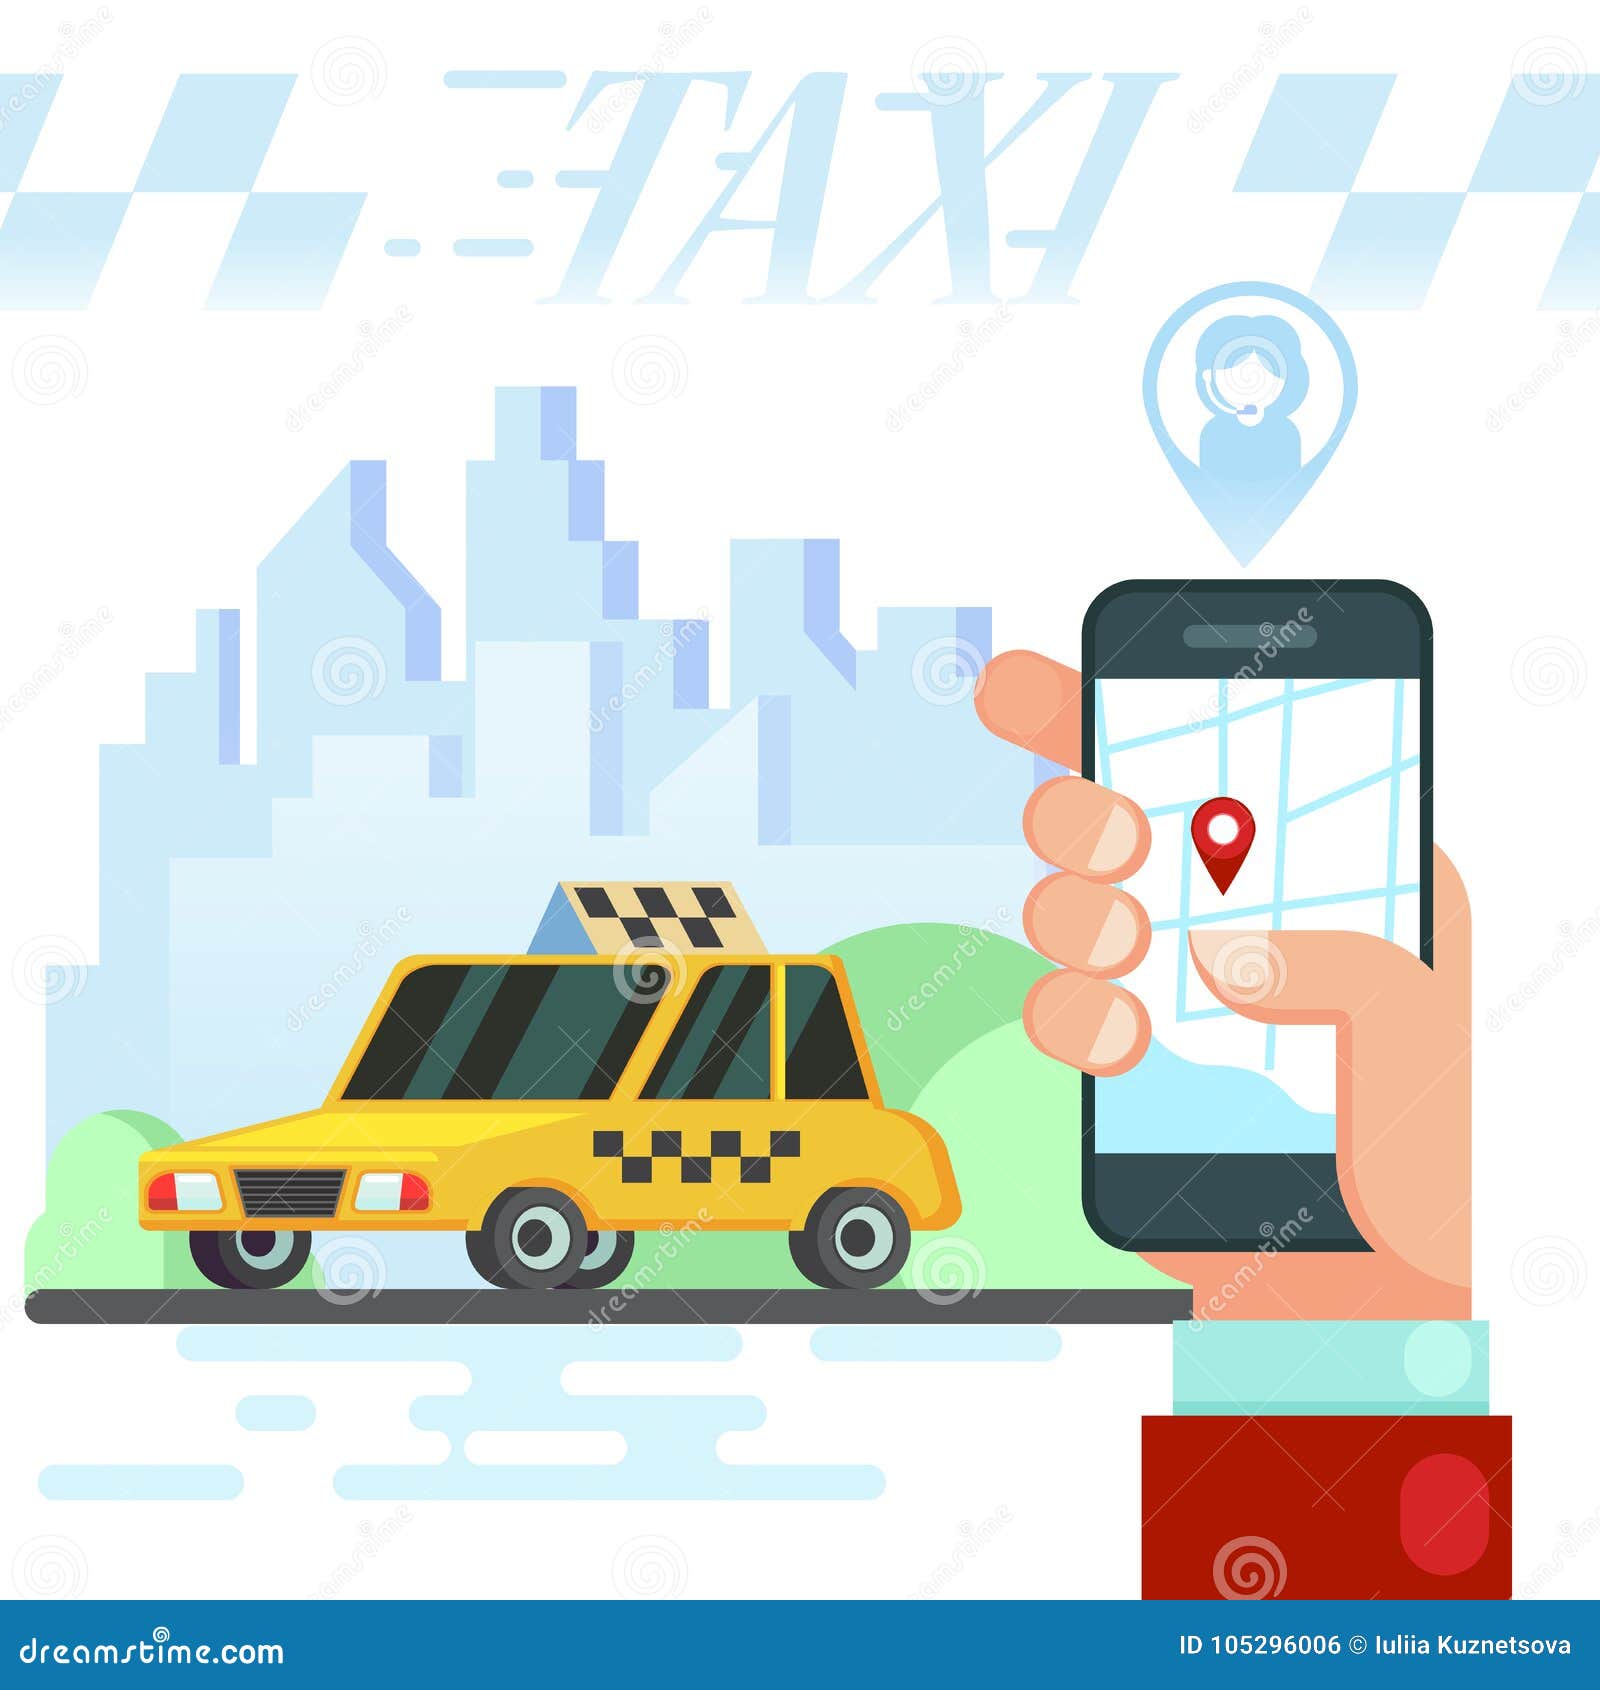 Mobile Auto Application Transport Service Position Pin On Map Stock Illustration Illustration Of Public Hand 105296006